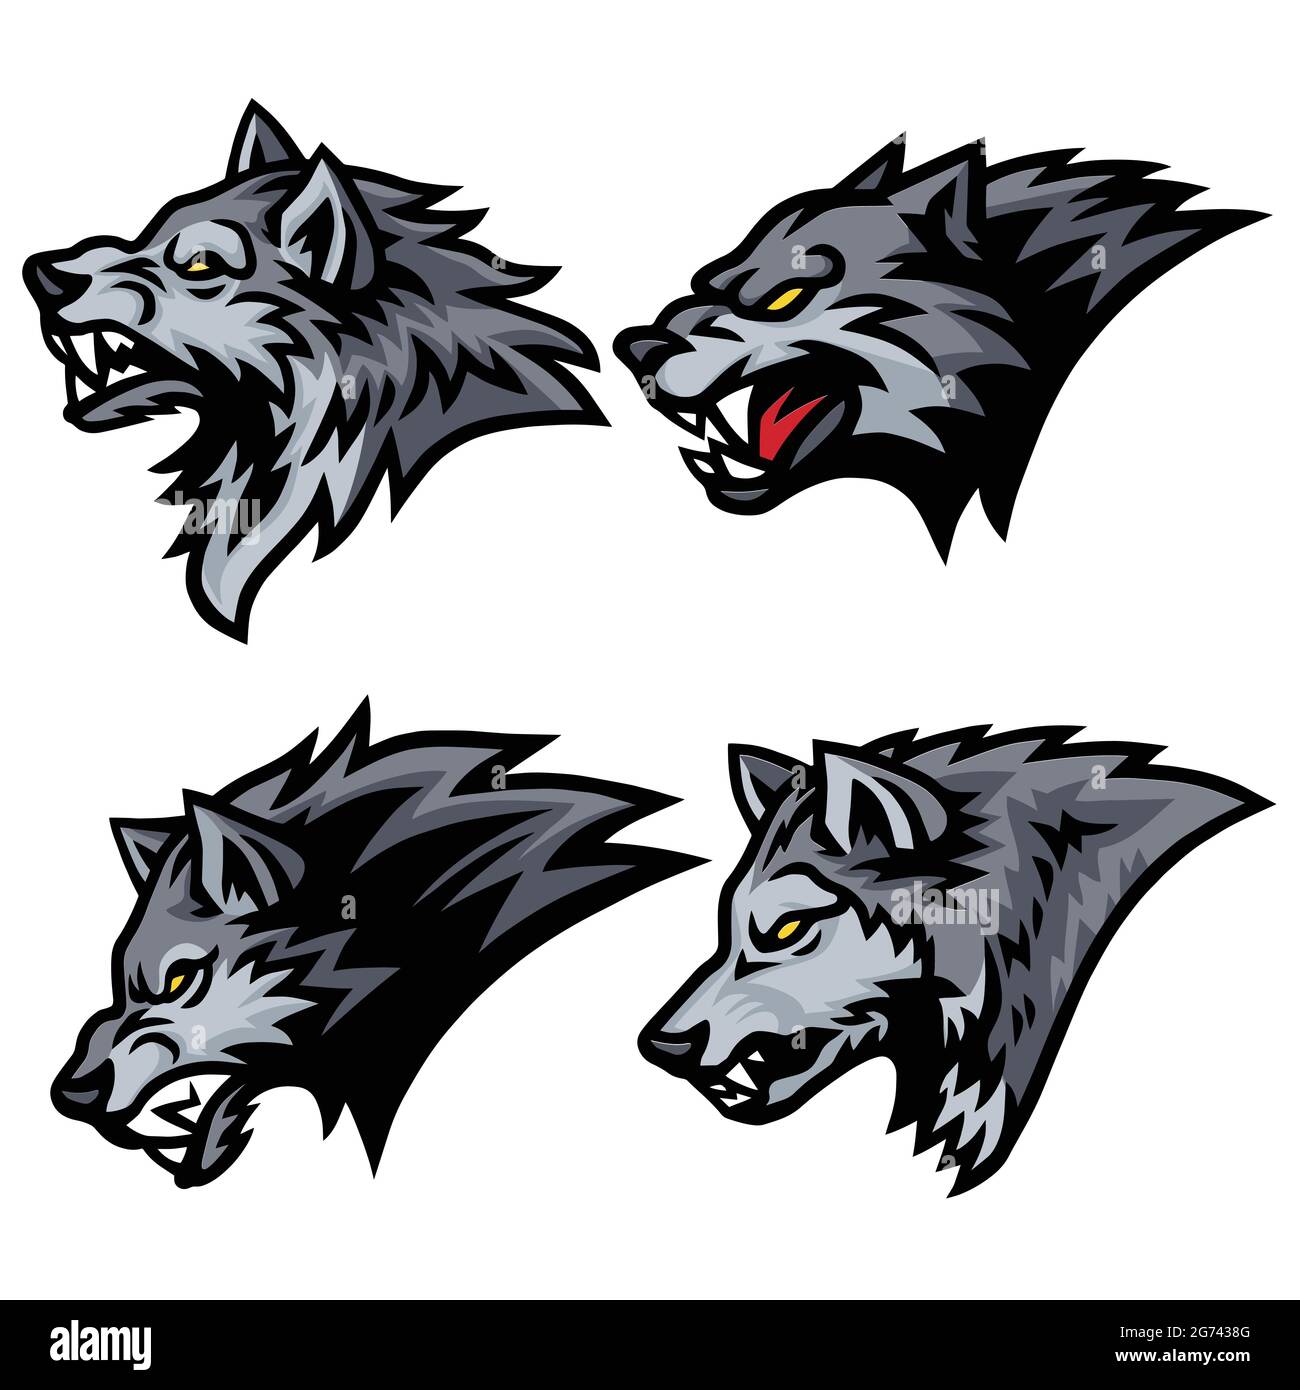 Angry Wolf Logo Design